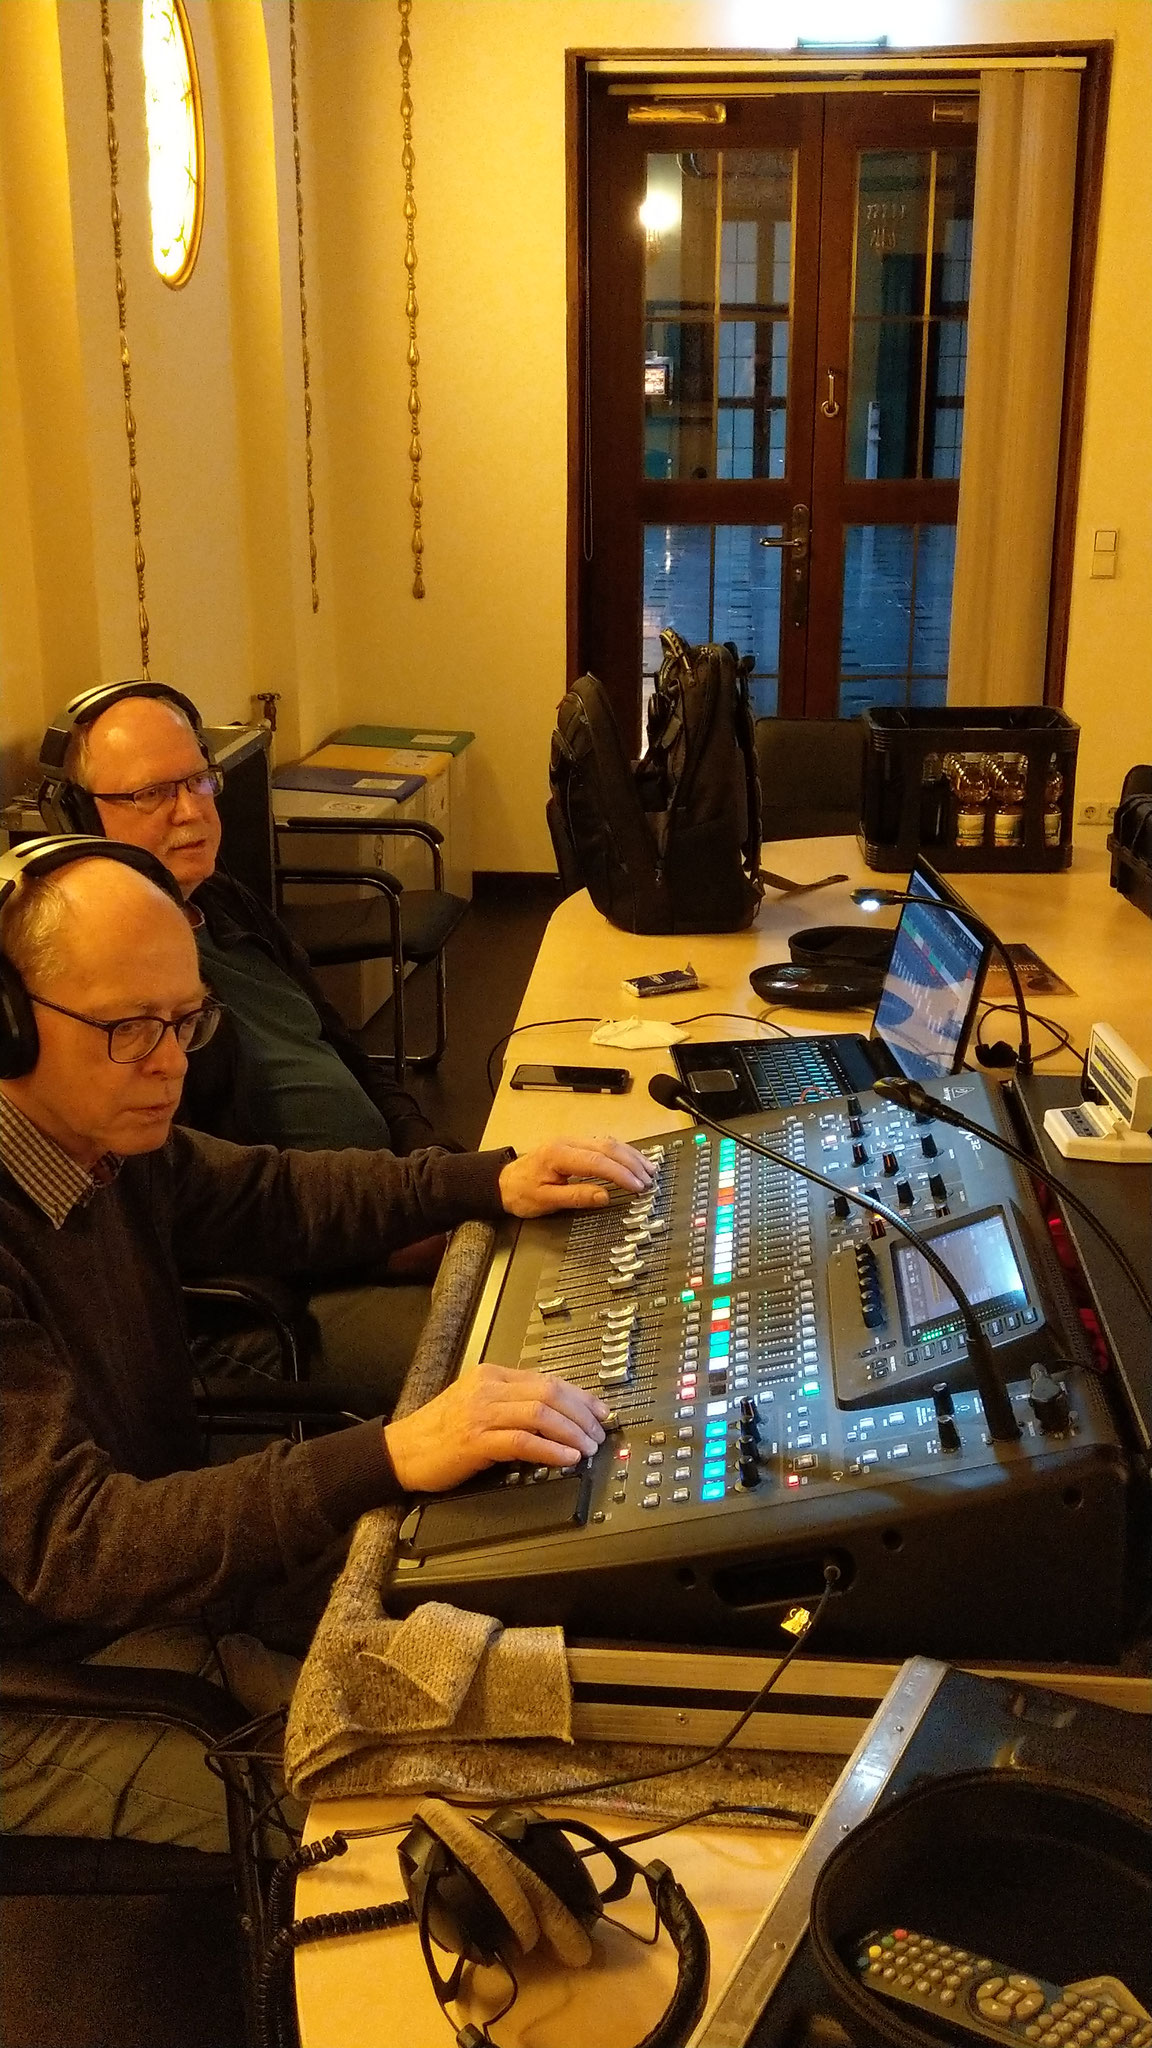 Werner Grabinger and colleague responsible for the recording!